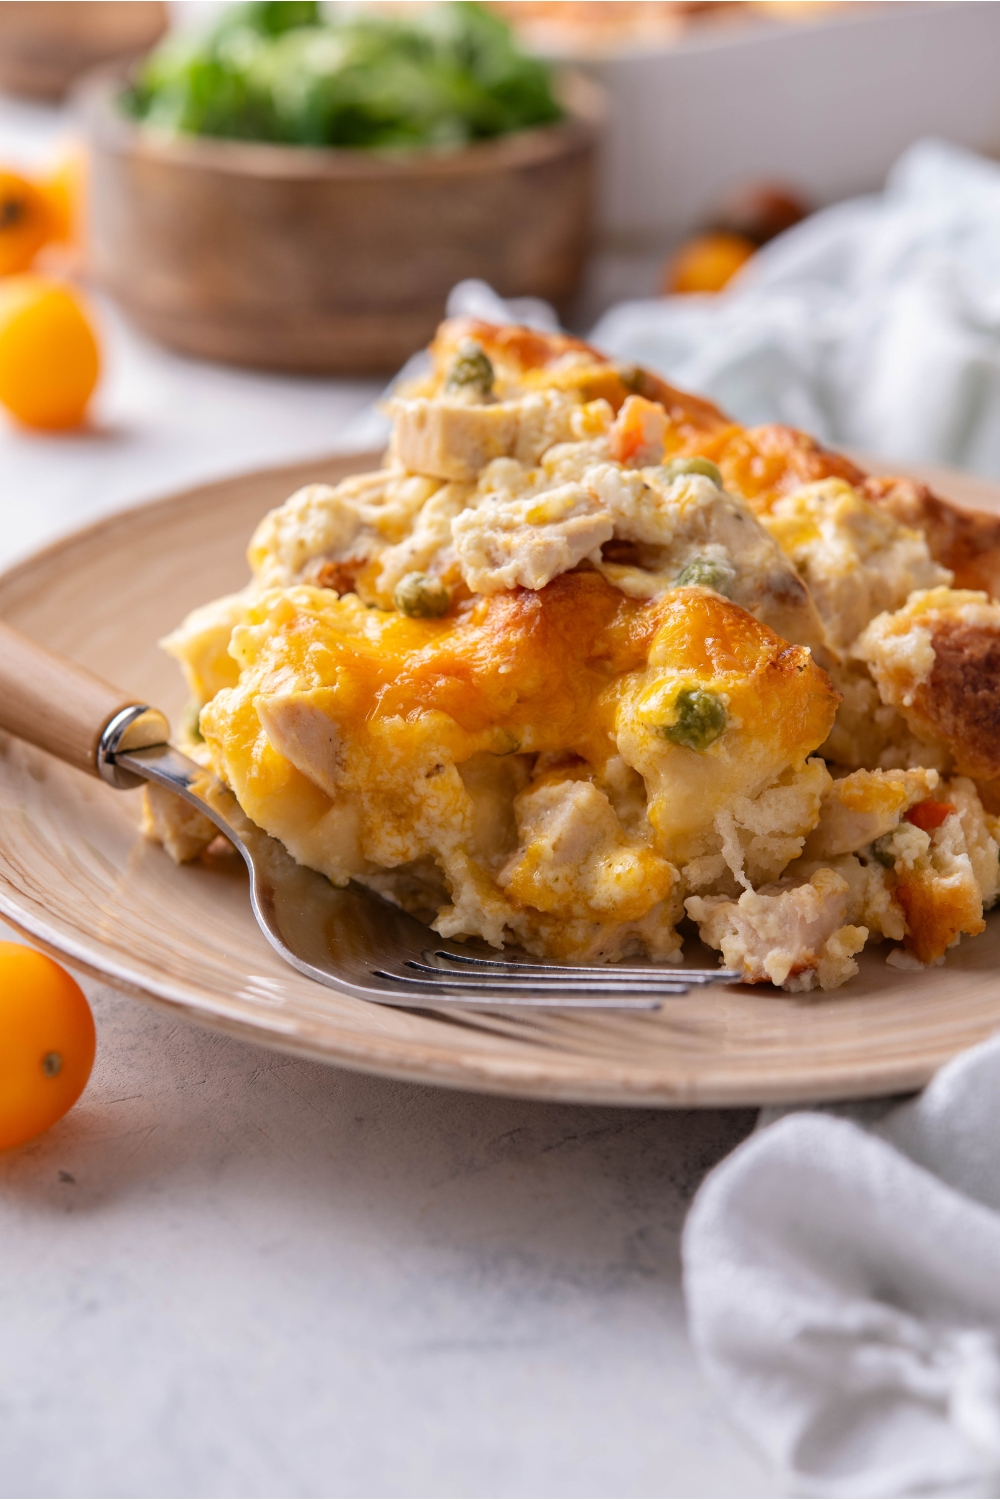 A serving of chicken and biscuit casserole piled high with a fork on the plate.